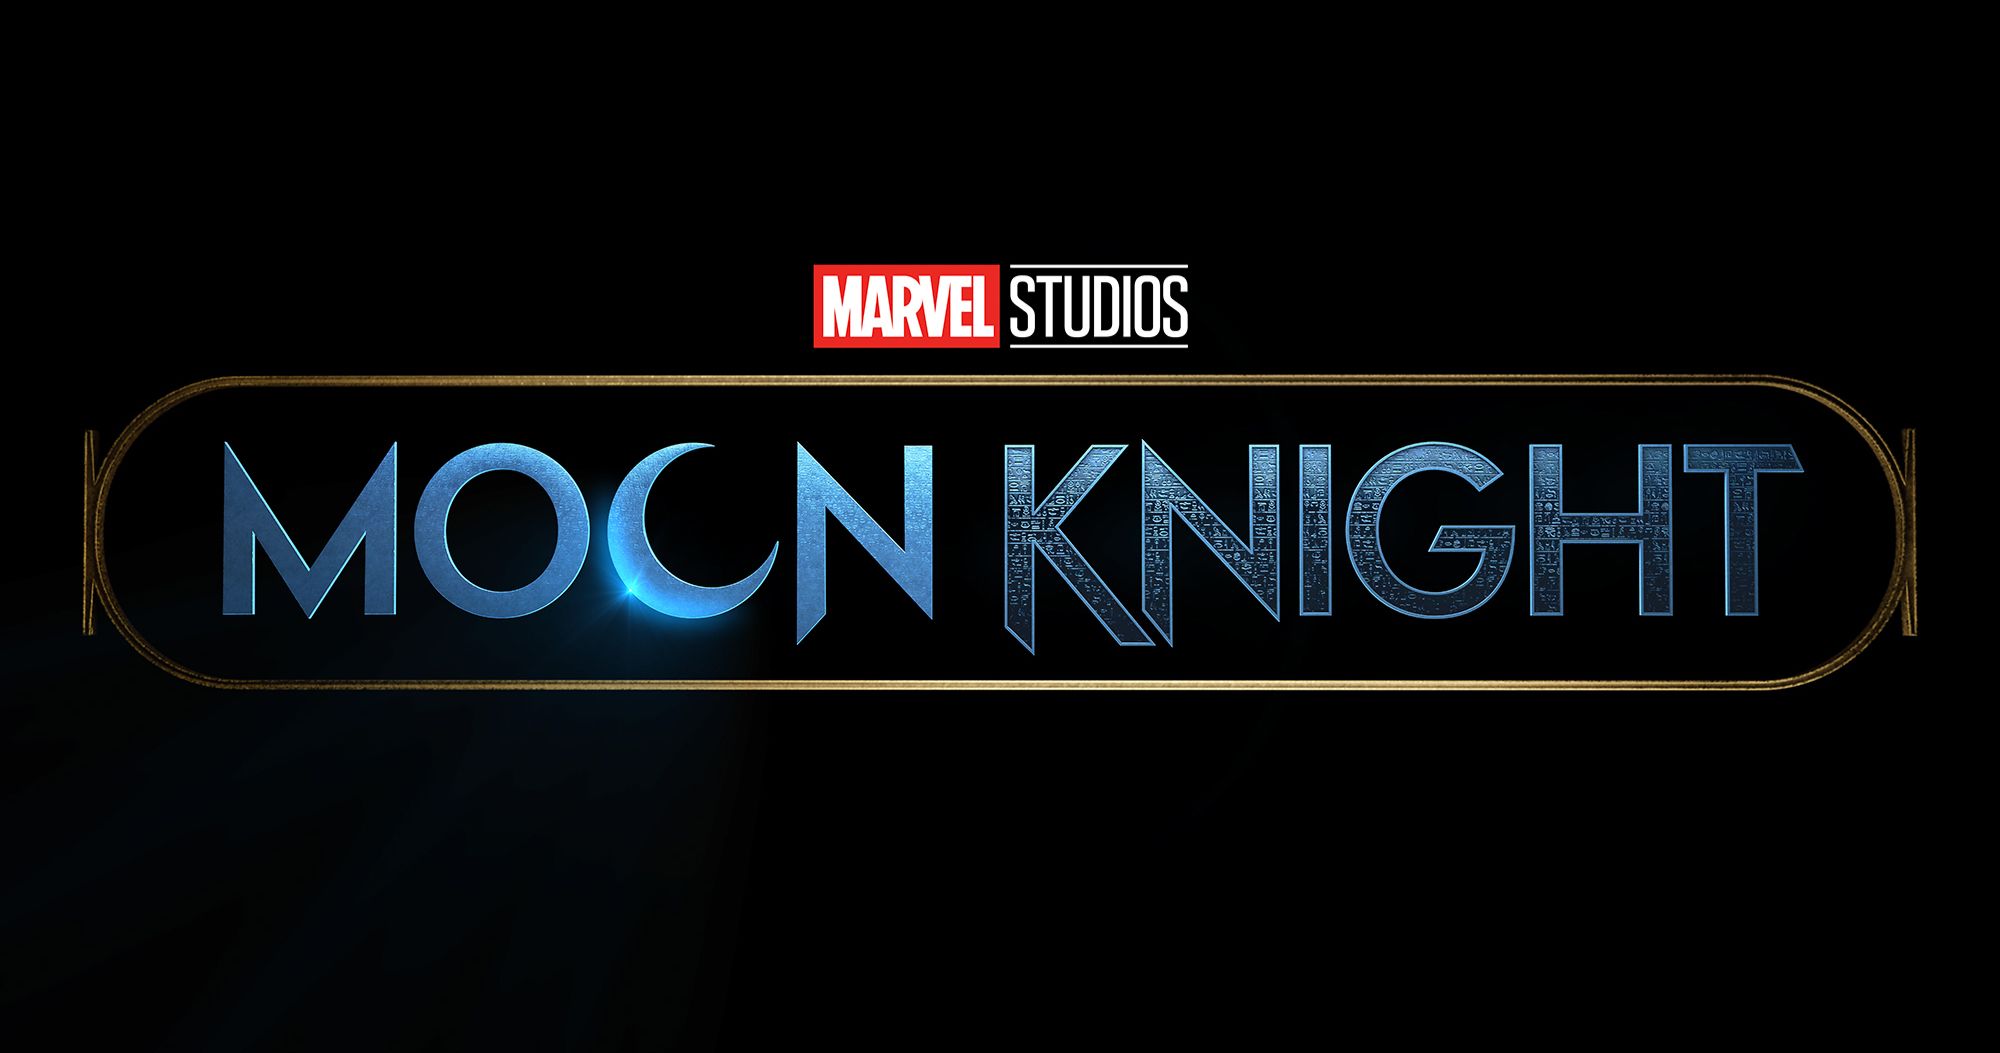 Moon Knight Disney+ Series Details Revealed by MCU Boss, Is Oscar Isaac Confirmed?